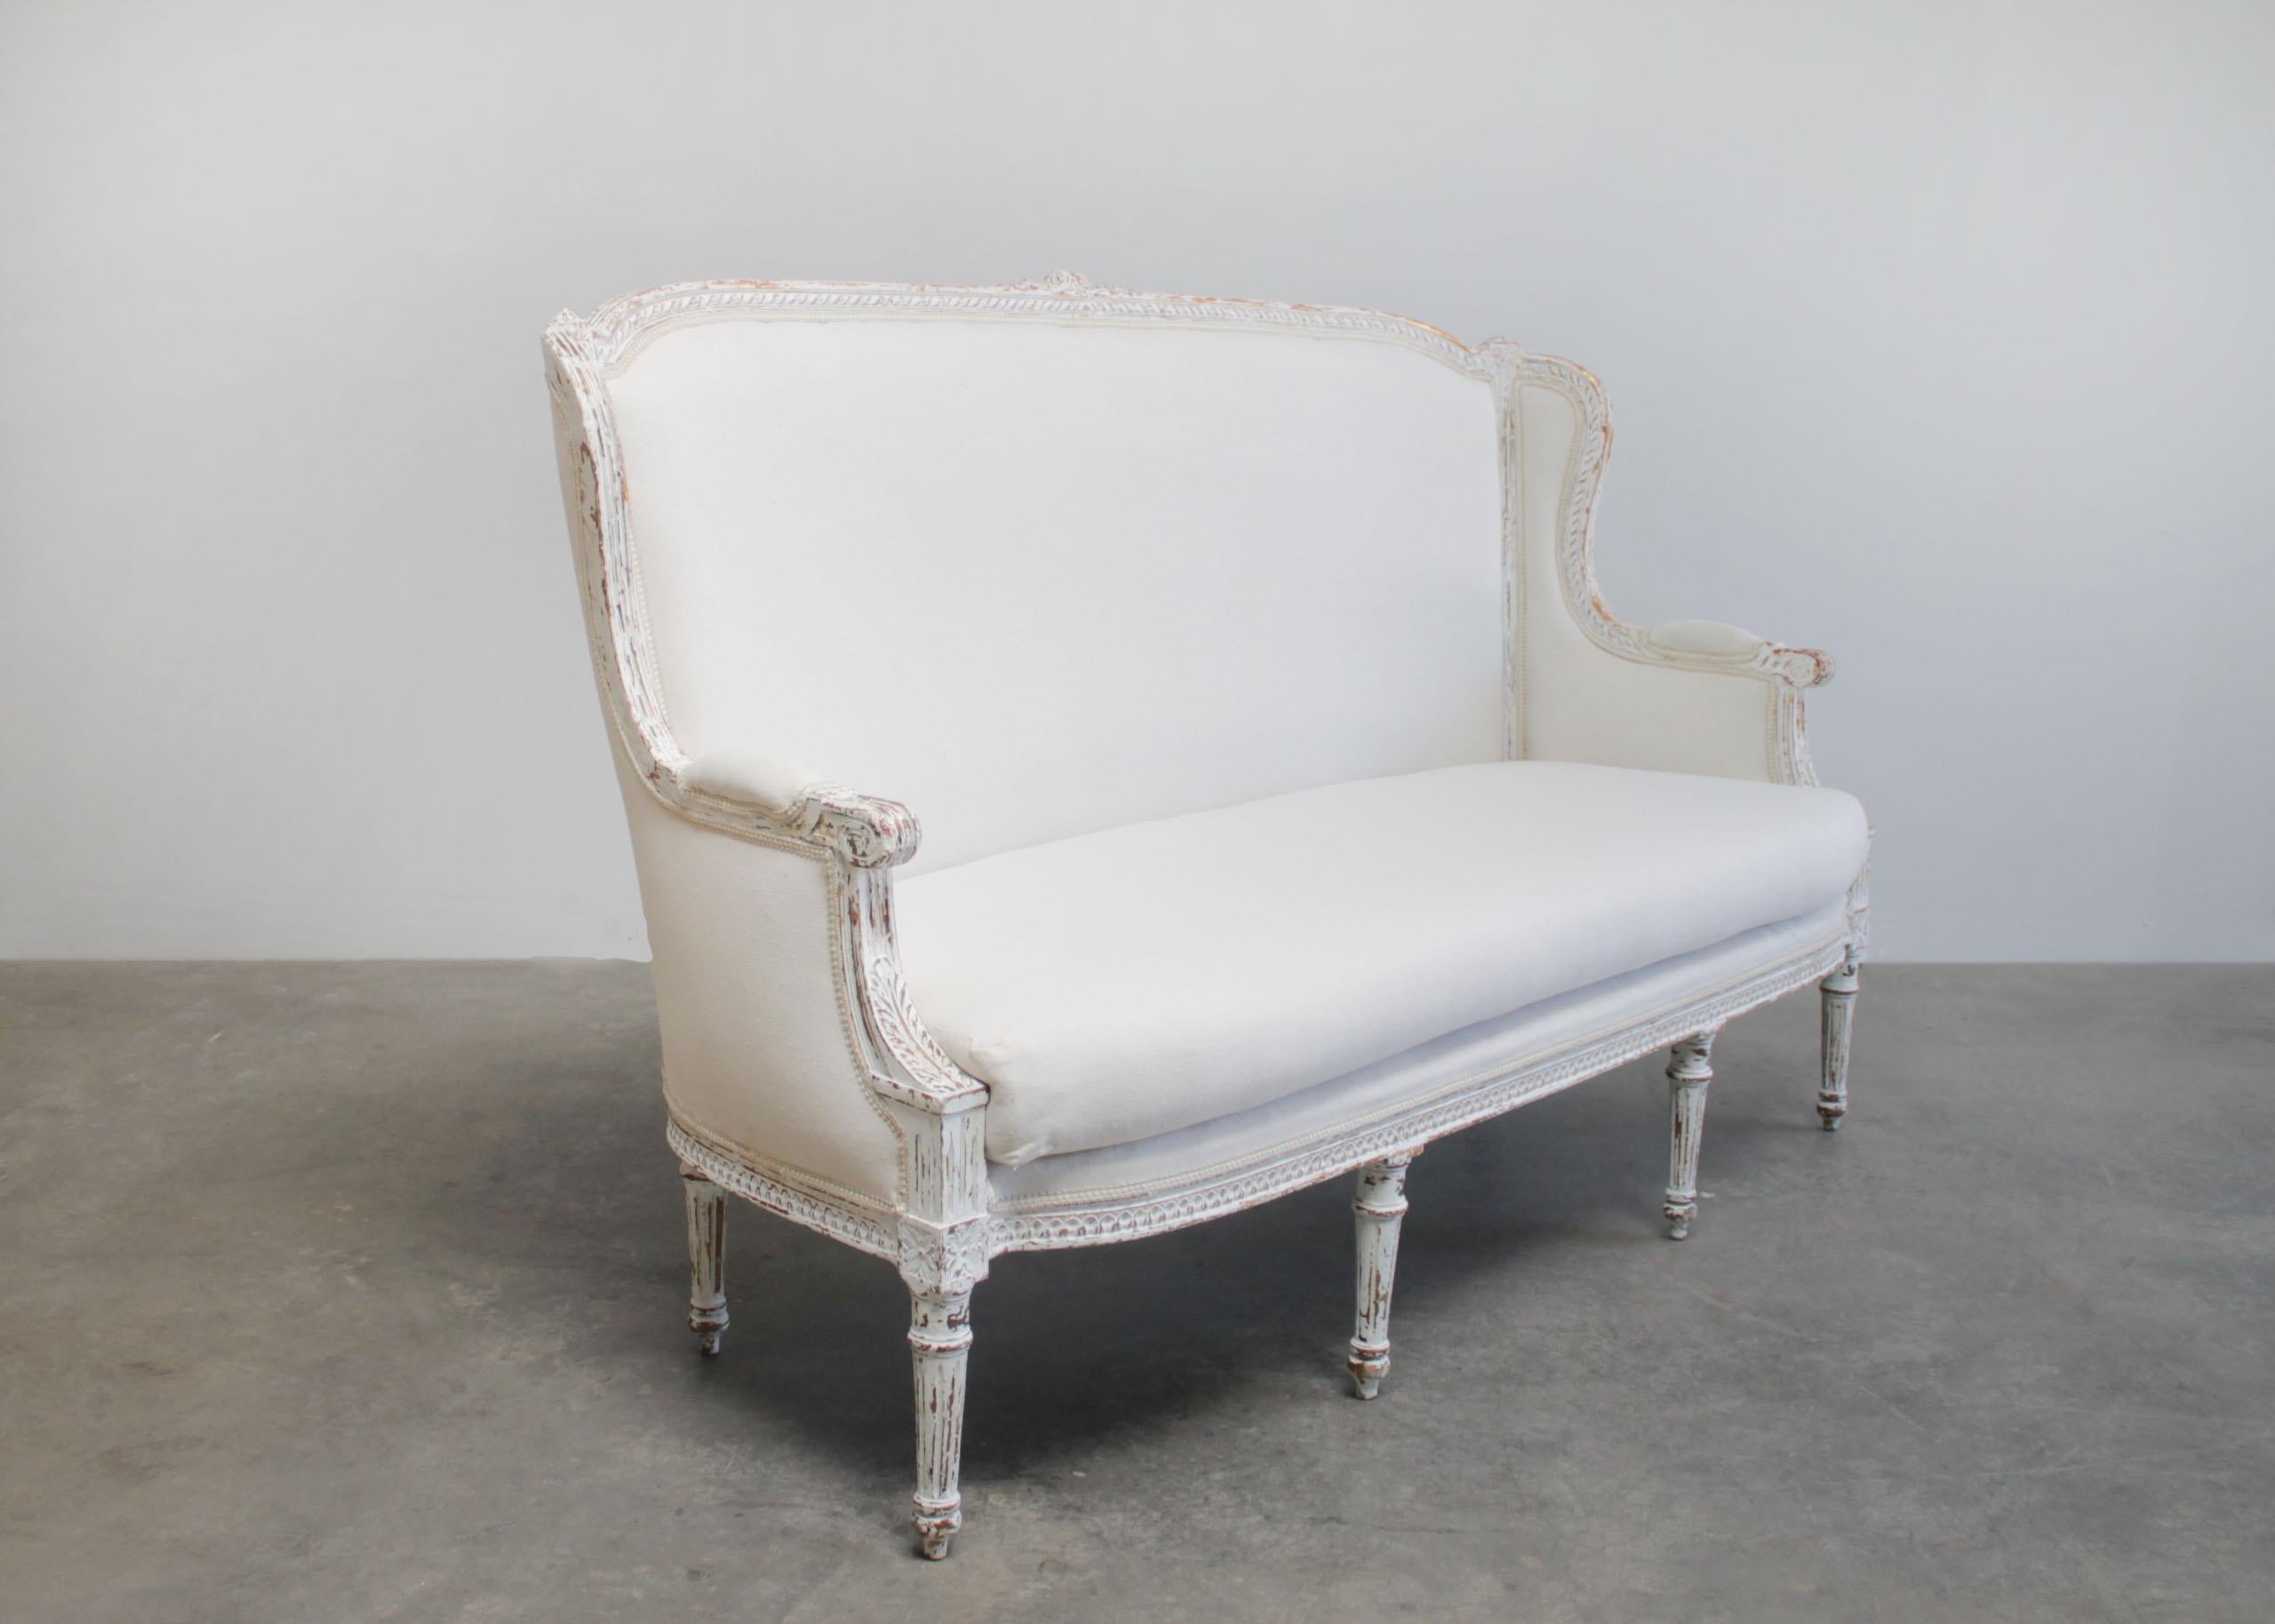 European Vintage Painted and Upholstered Louis XVI Style Sofa Settee